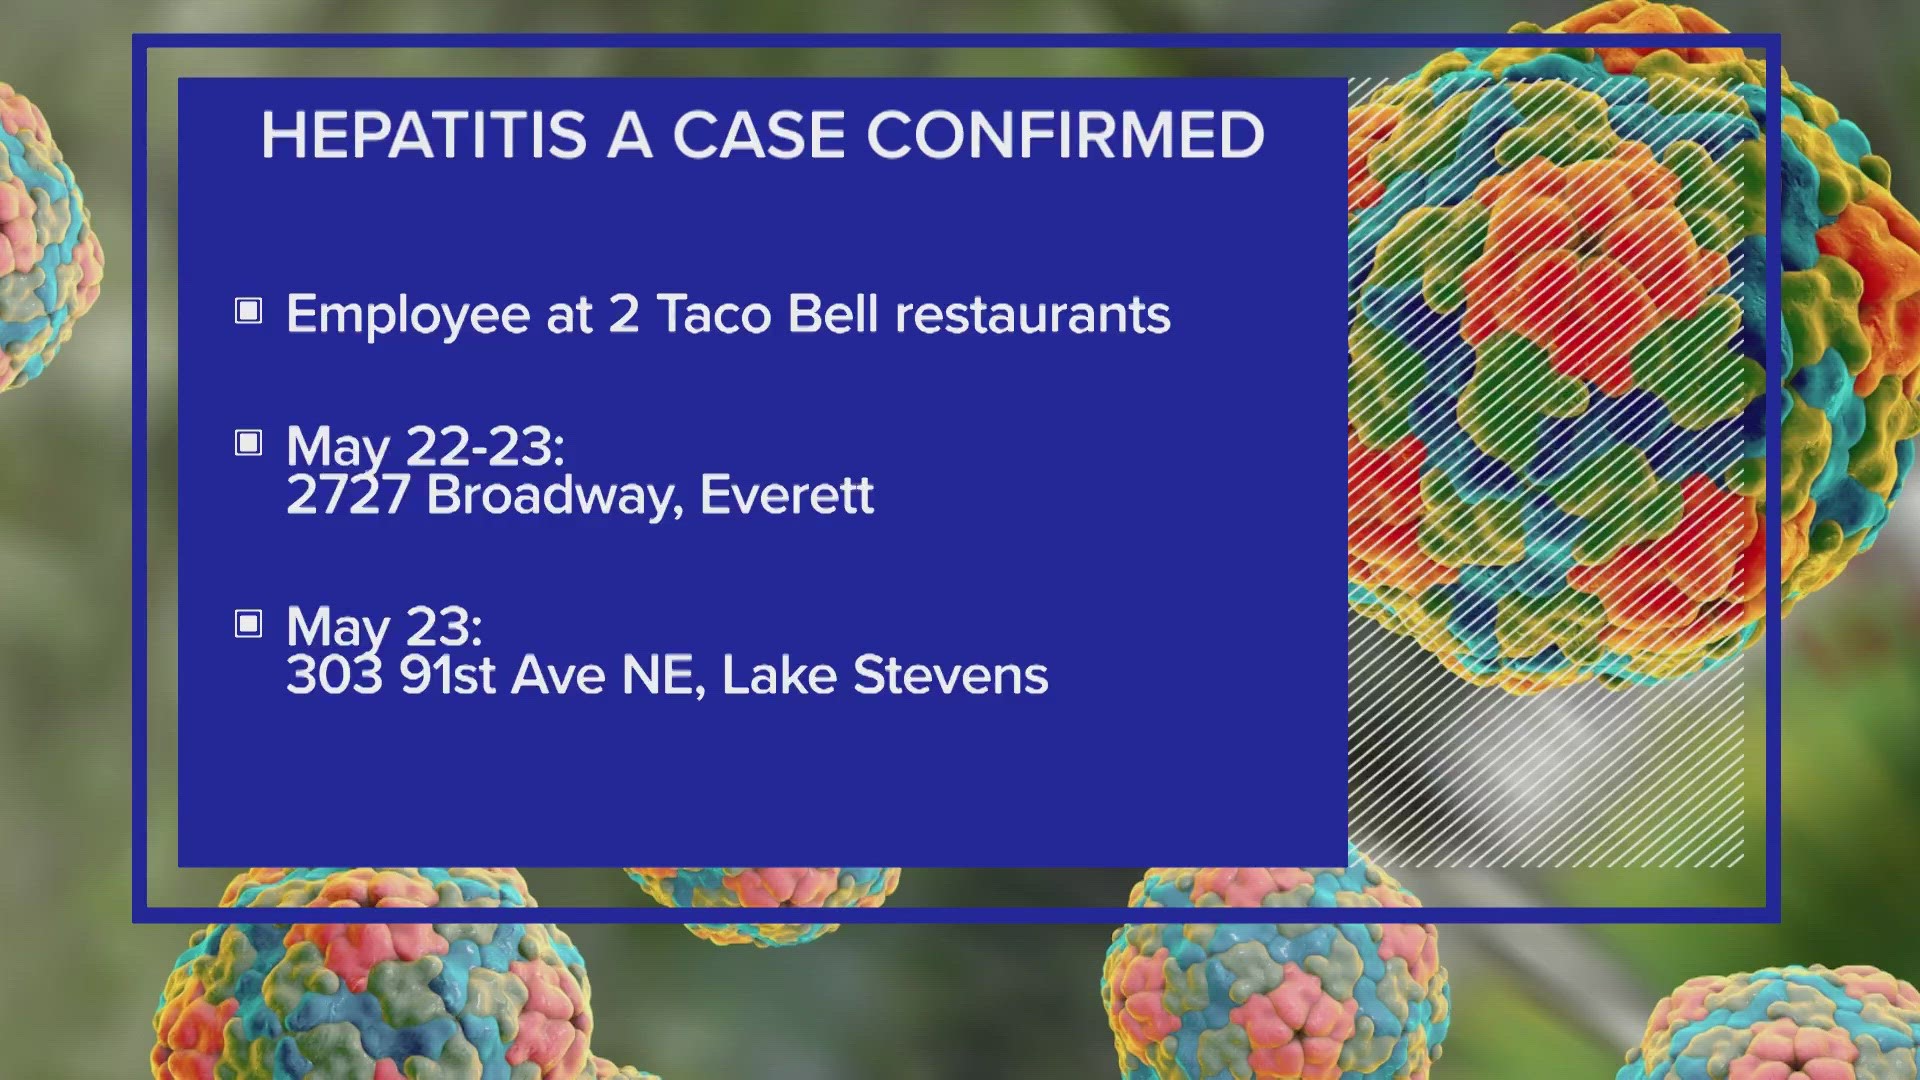 The Snohomish Co. Health Department is issuing a warning after an Everett Taco Bell employee was found to have hepatitis A